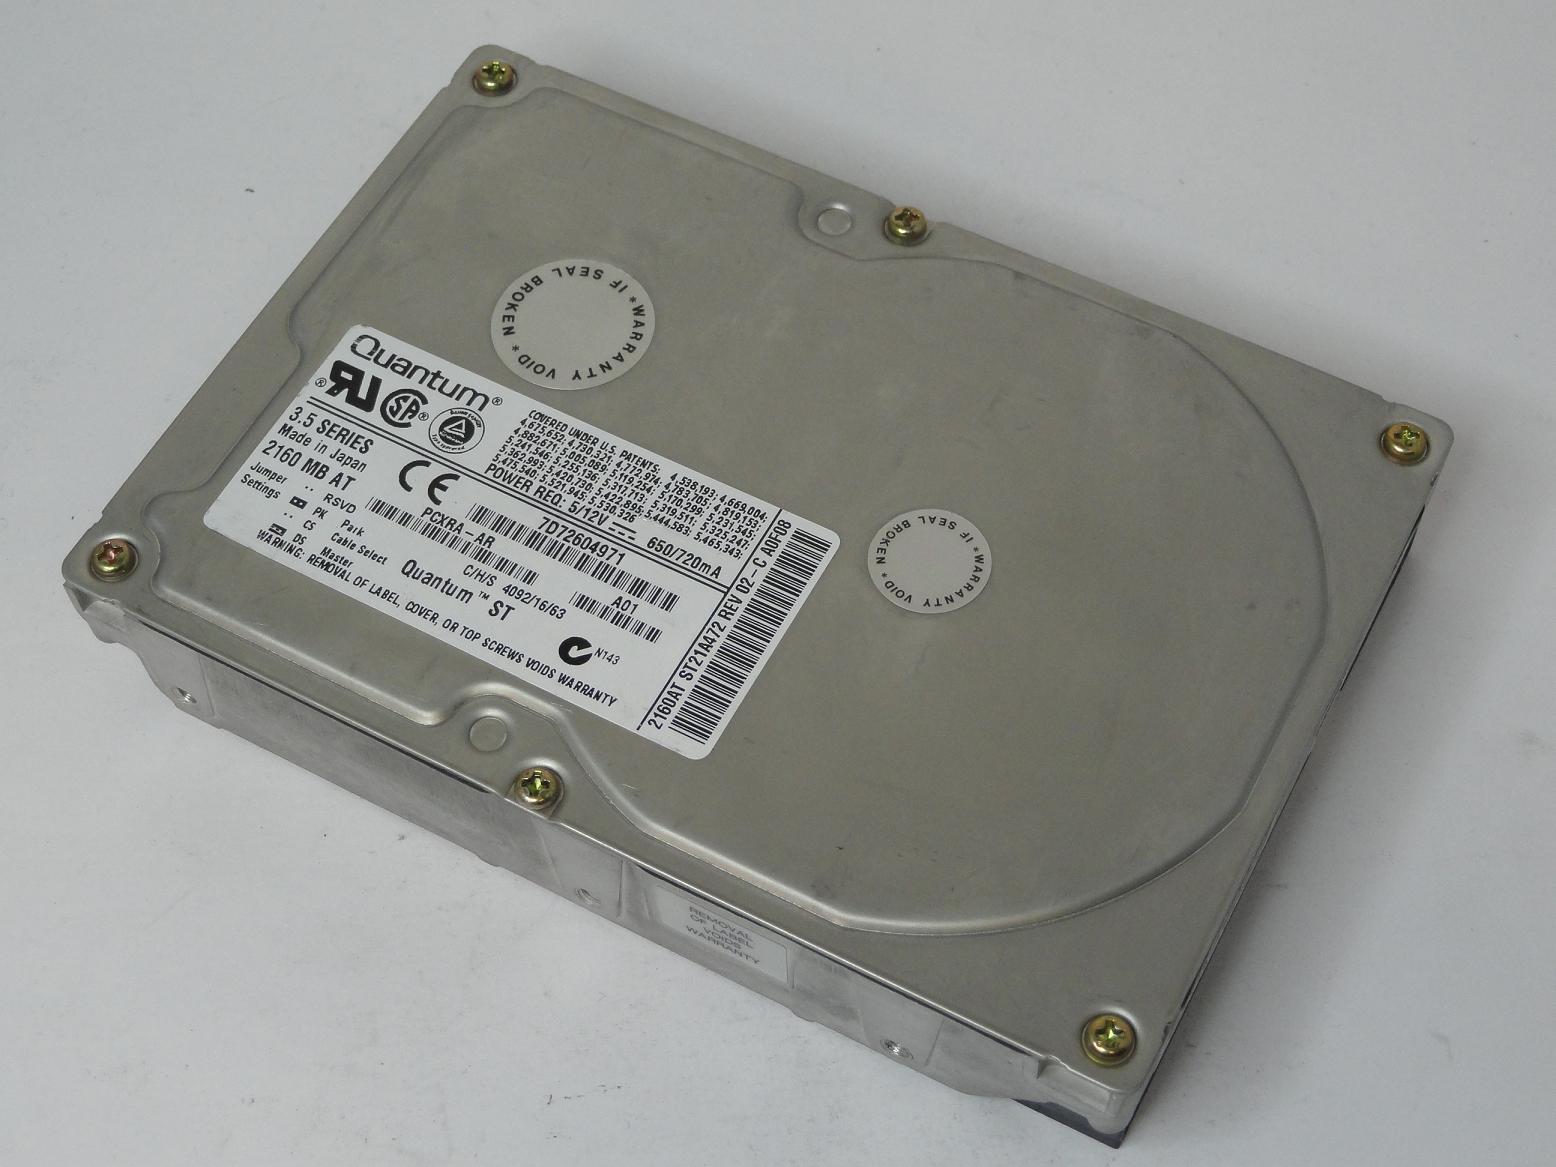 ST21A011 - Quantum 2.1GB IDE 4500rpm 3.5in ST 3.5 Series HDD - USED